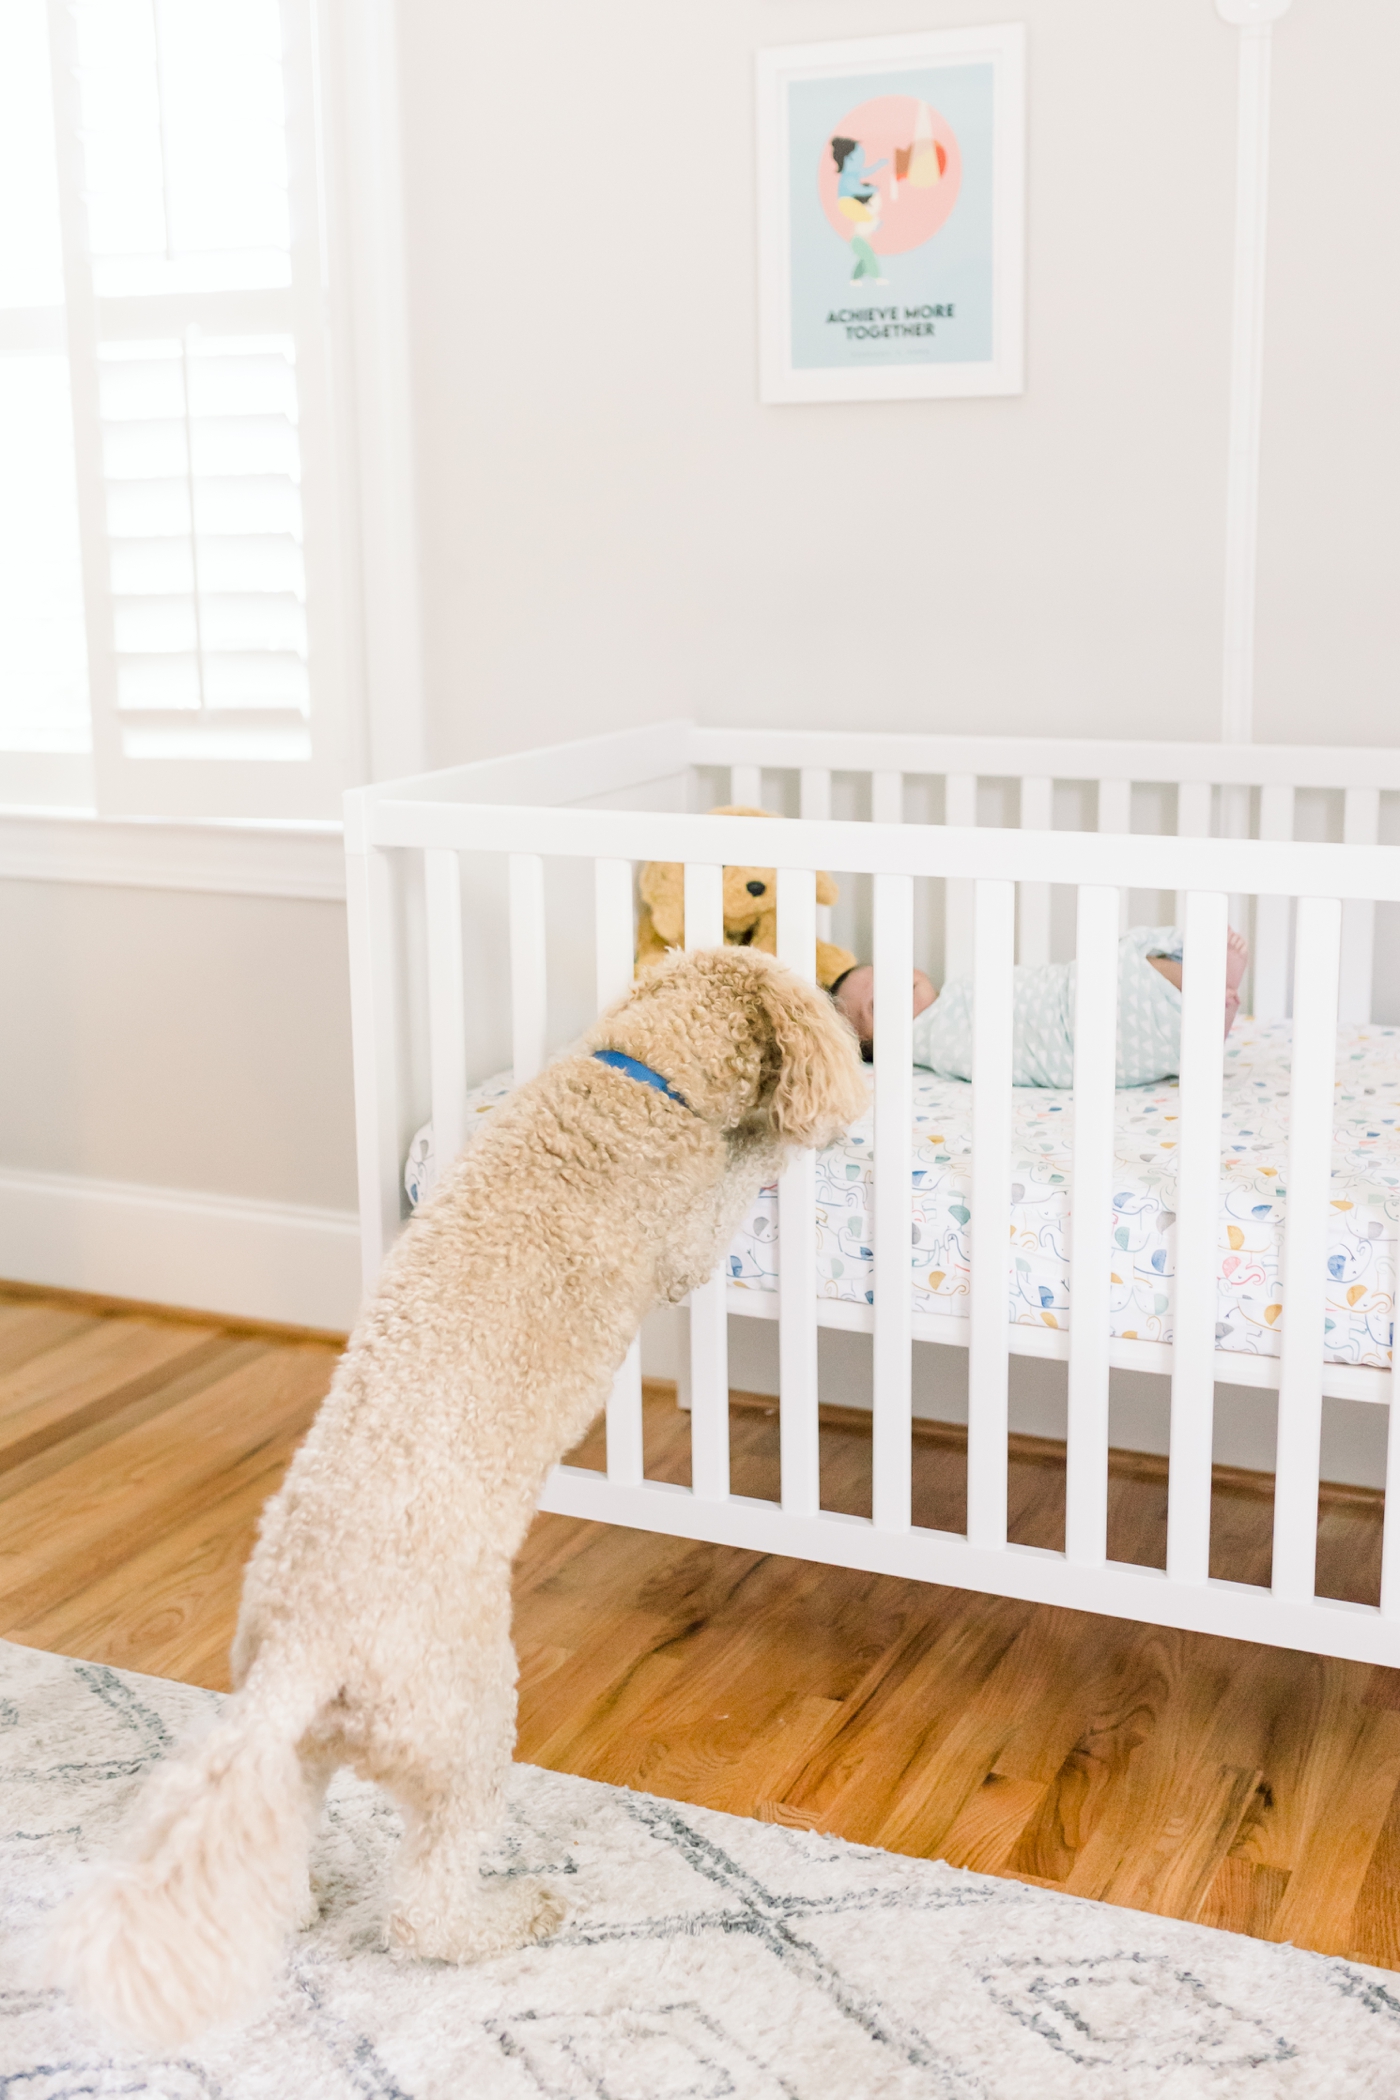 Dog looking over baby laying in crib during newborn photoshoot. Photo by Caitlyn Motycka Photography.